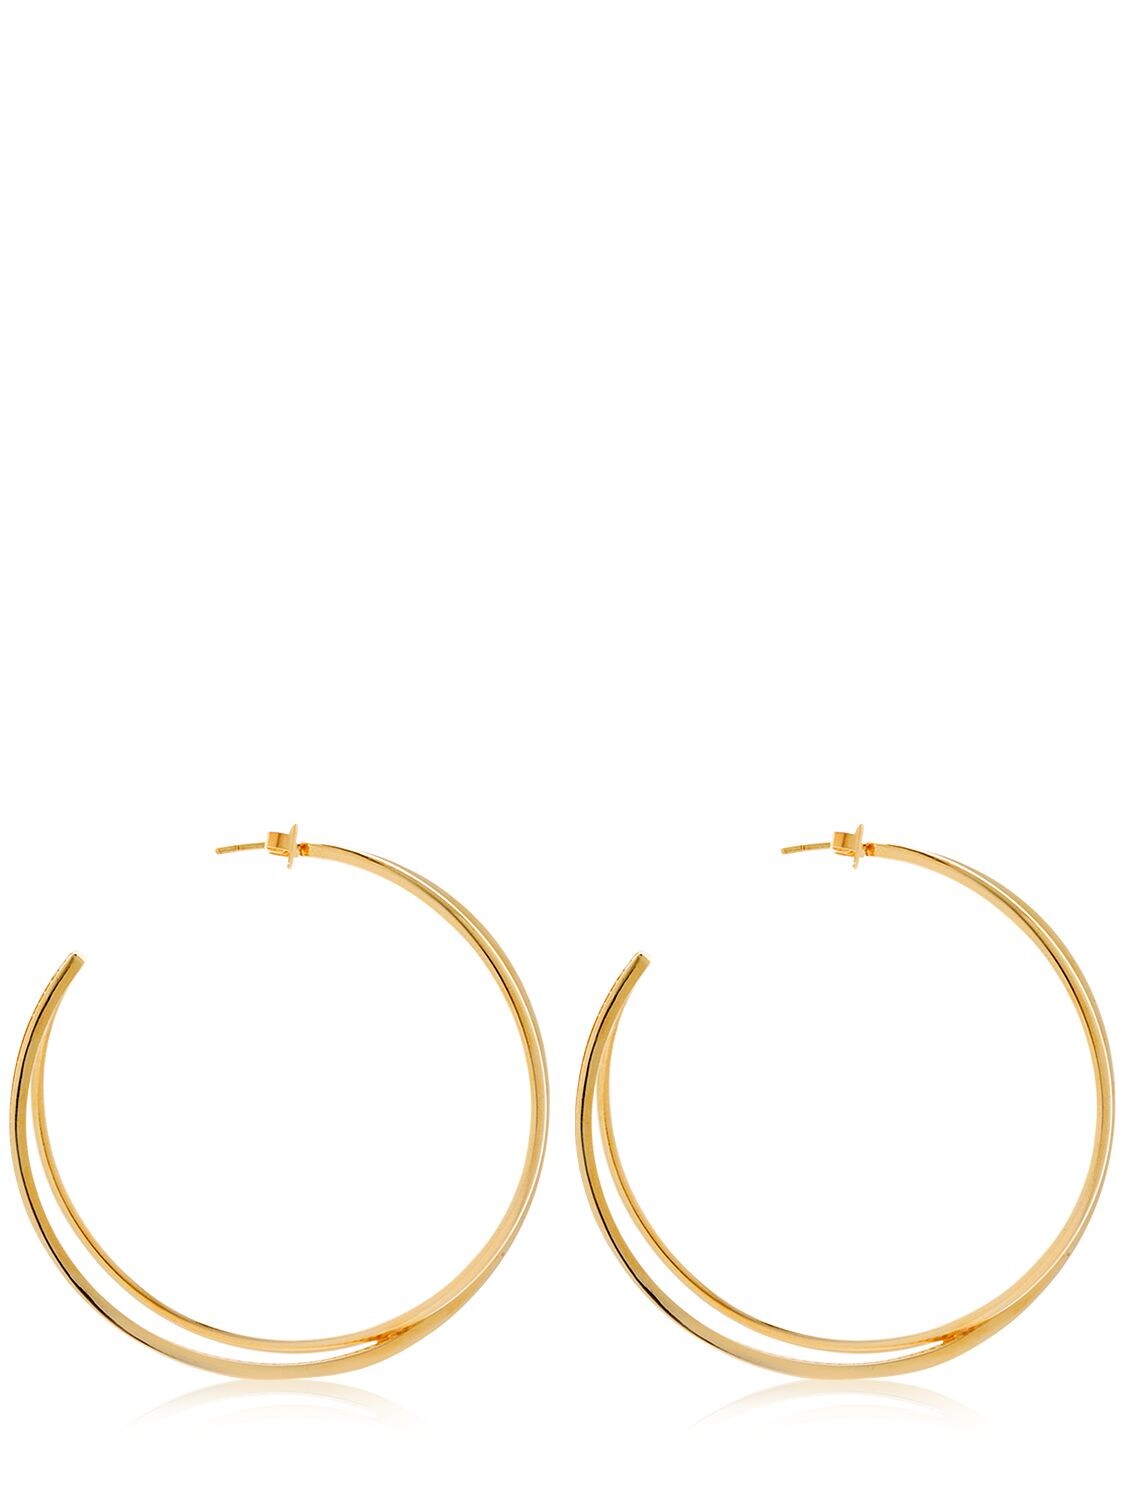 Joanna Laura Constantine Large Criss Cross Earrings In Gold